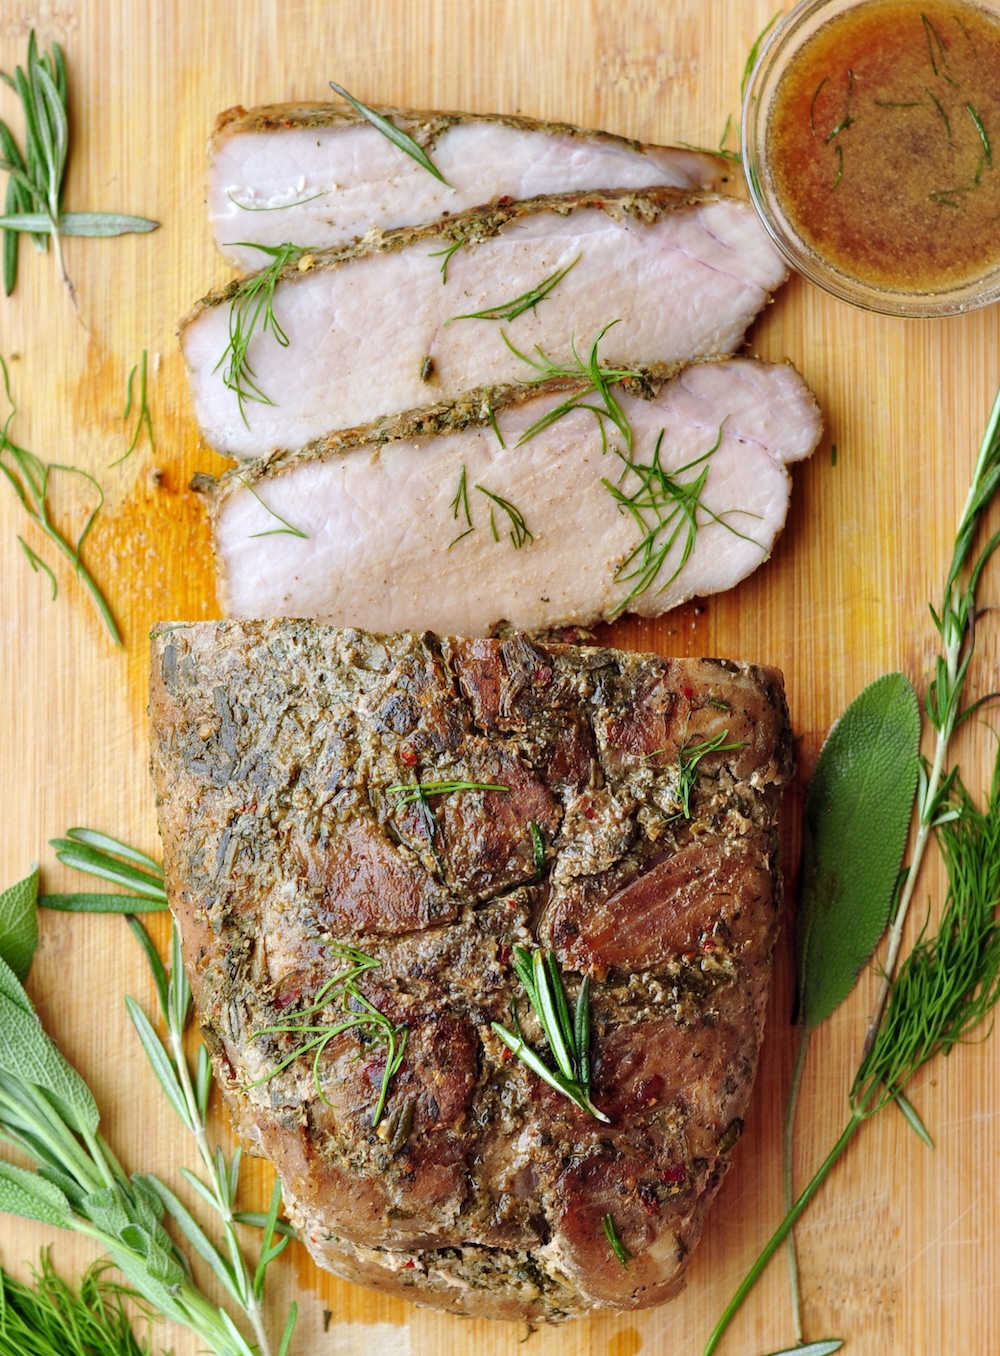 Slice the sous vide pork loin into thick slices, garnish with fresh herbs, and drizzle with the serving sauce before serving.